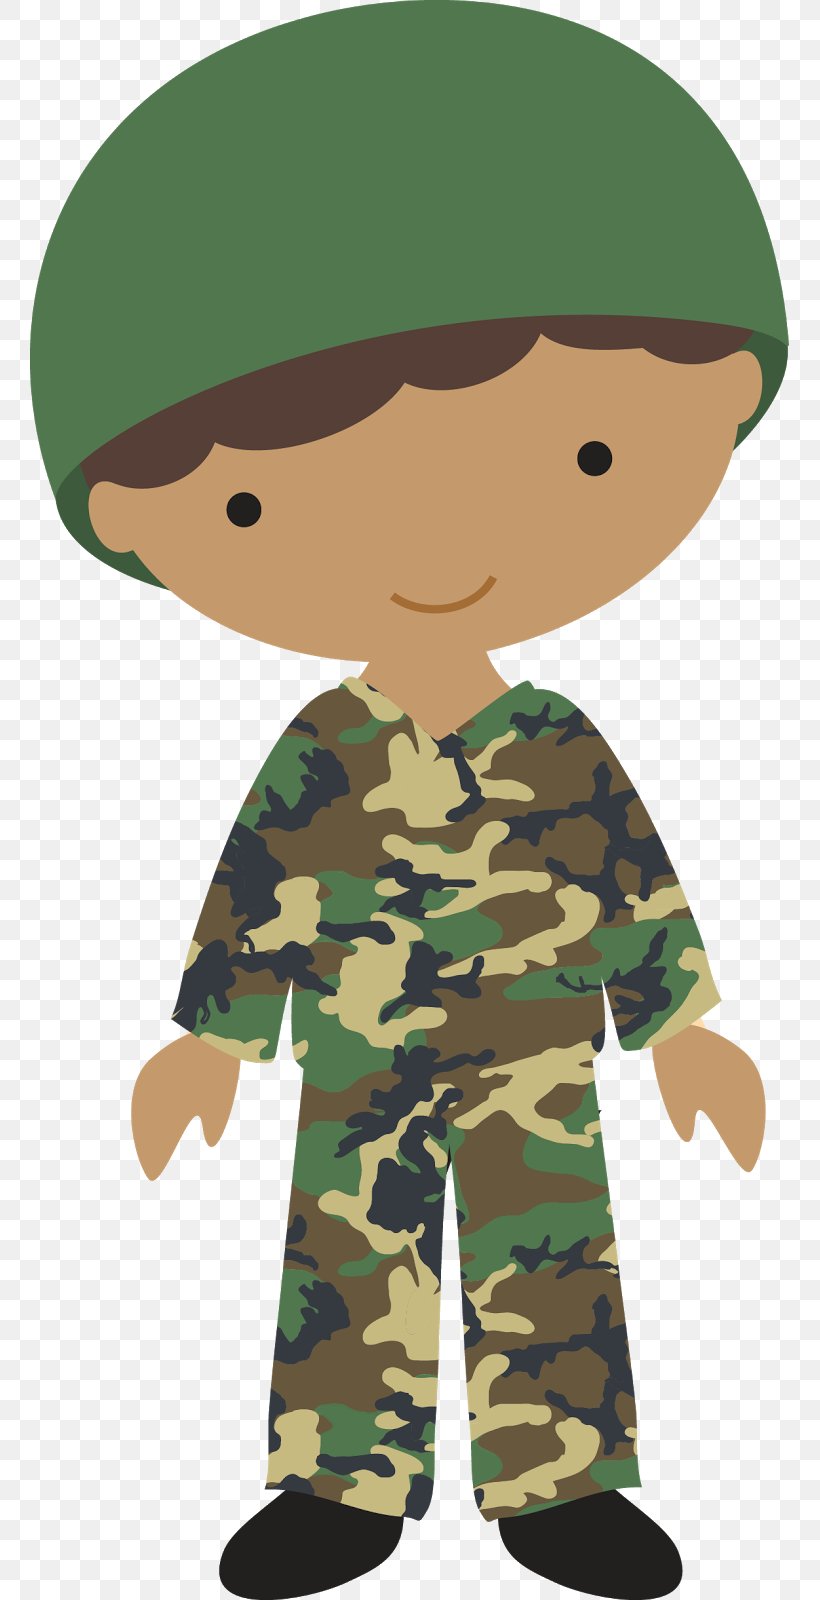 Soldier Costume Clip Art, PNG, 759x1600px, Soldier, Army, Book, Boy, Camouflage Download Free